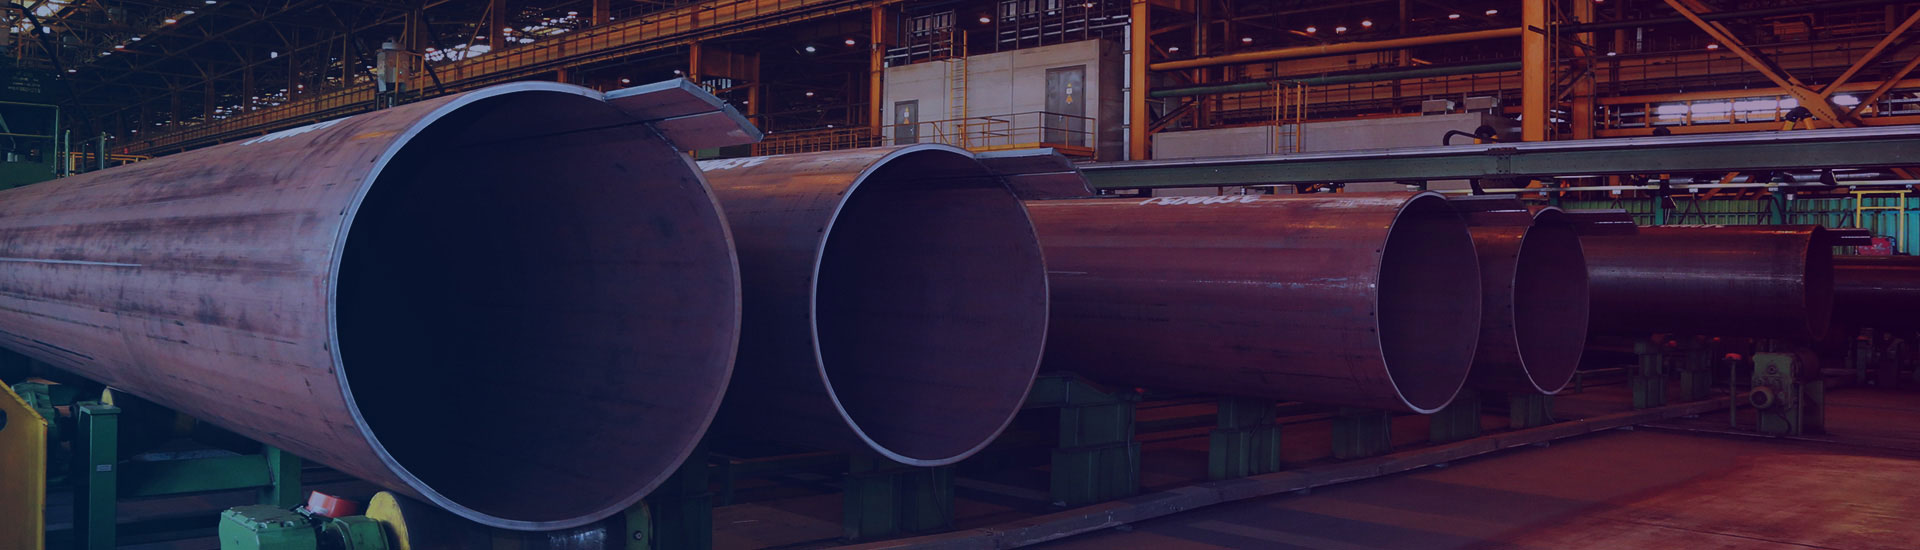 line pipe wholesale,lsaw pipes,steel tube manufacturers